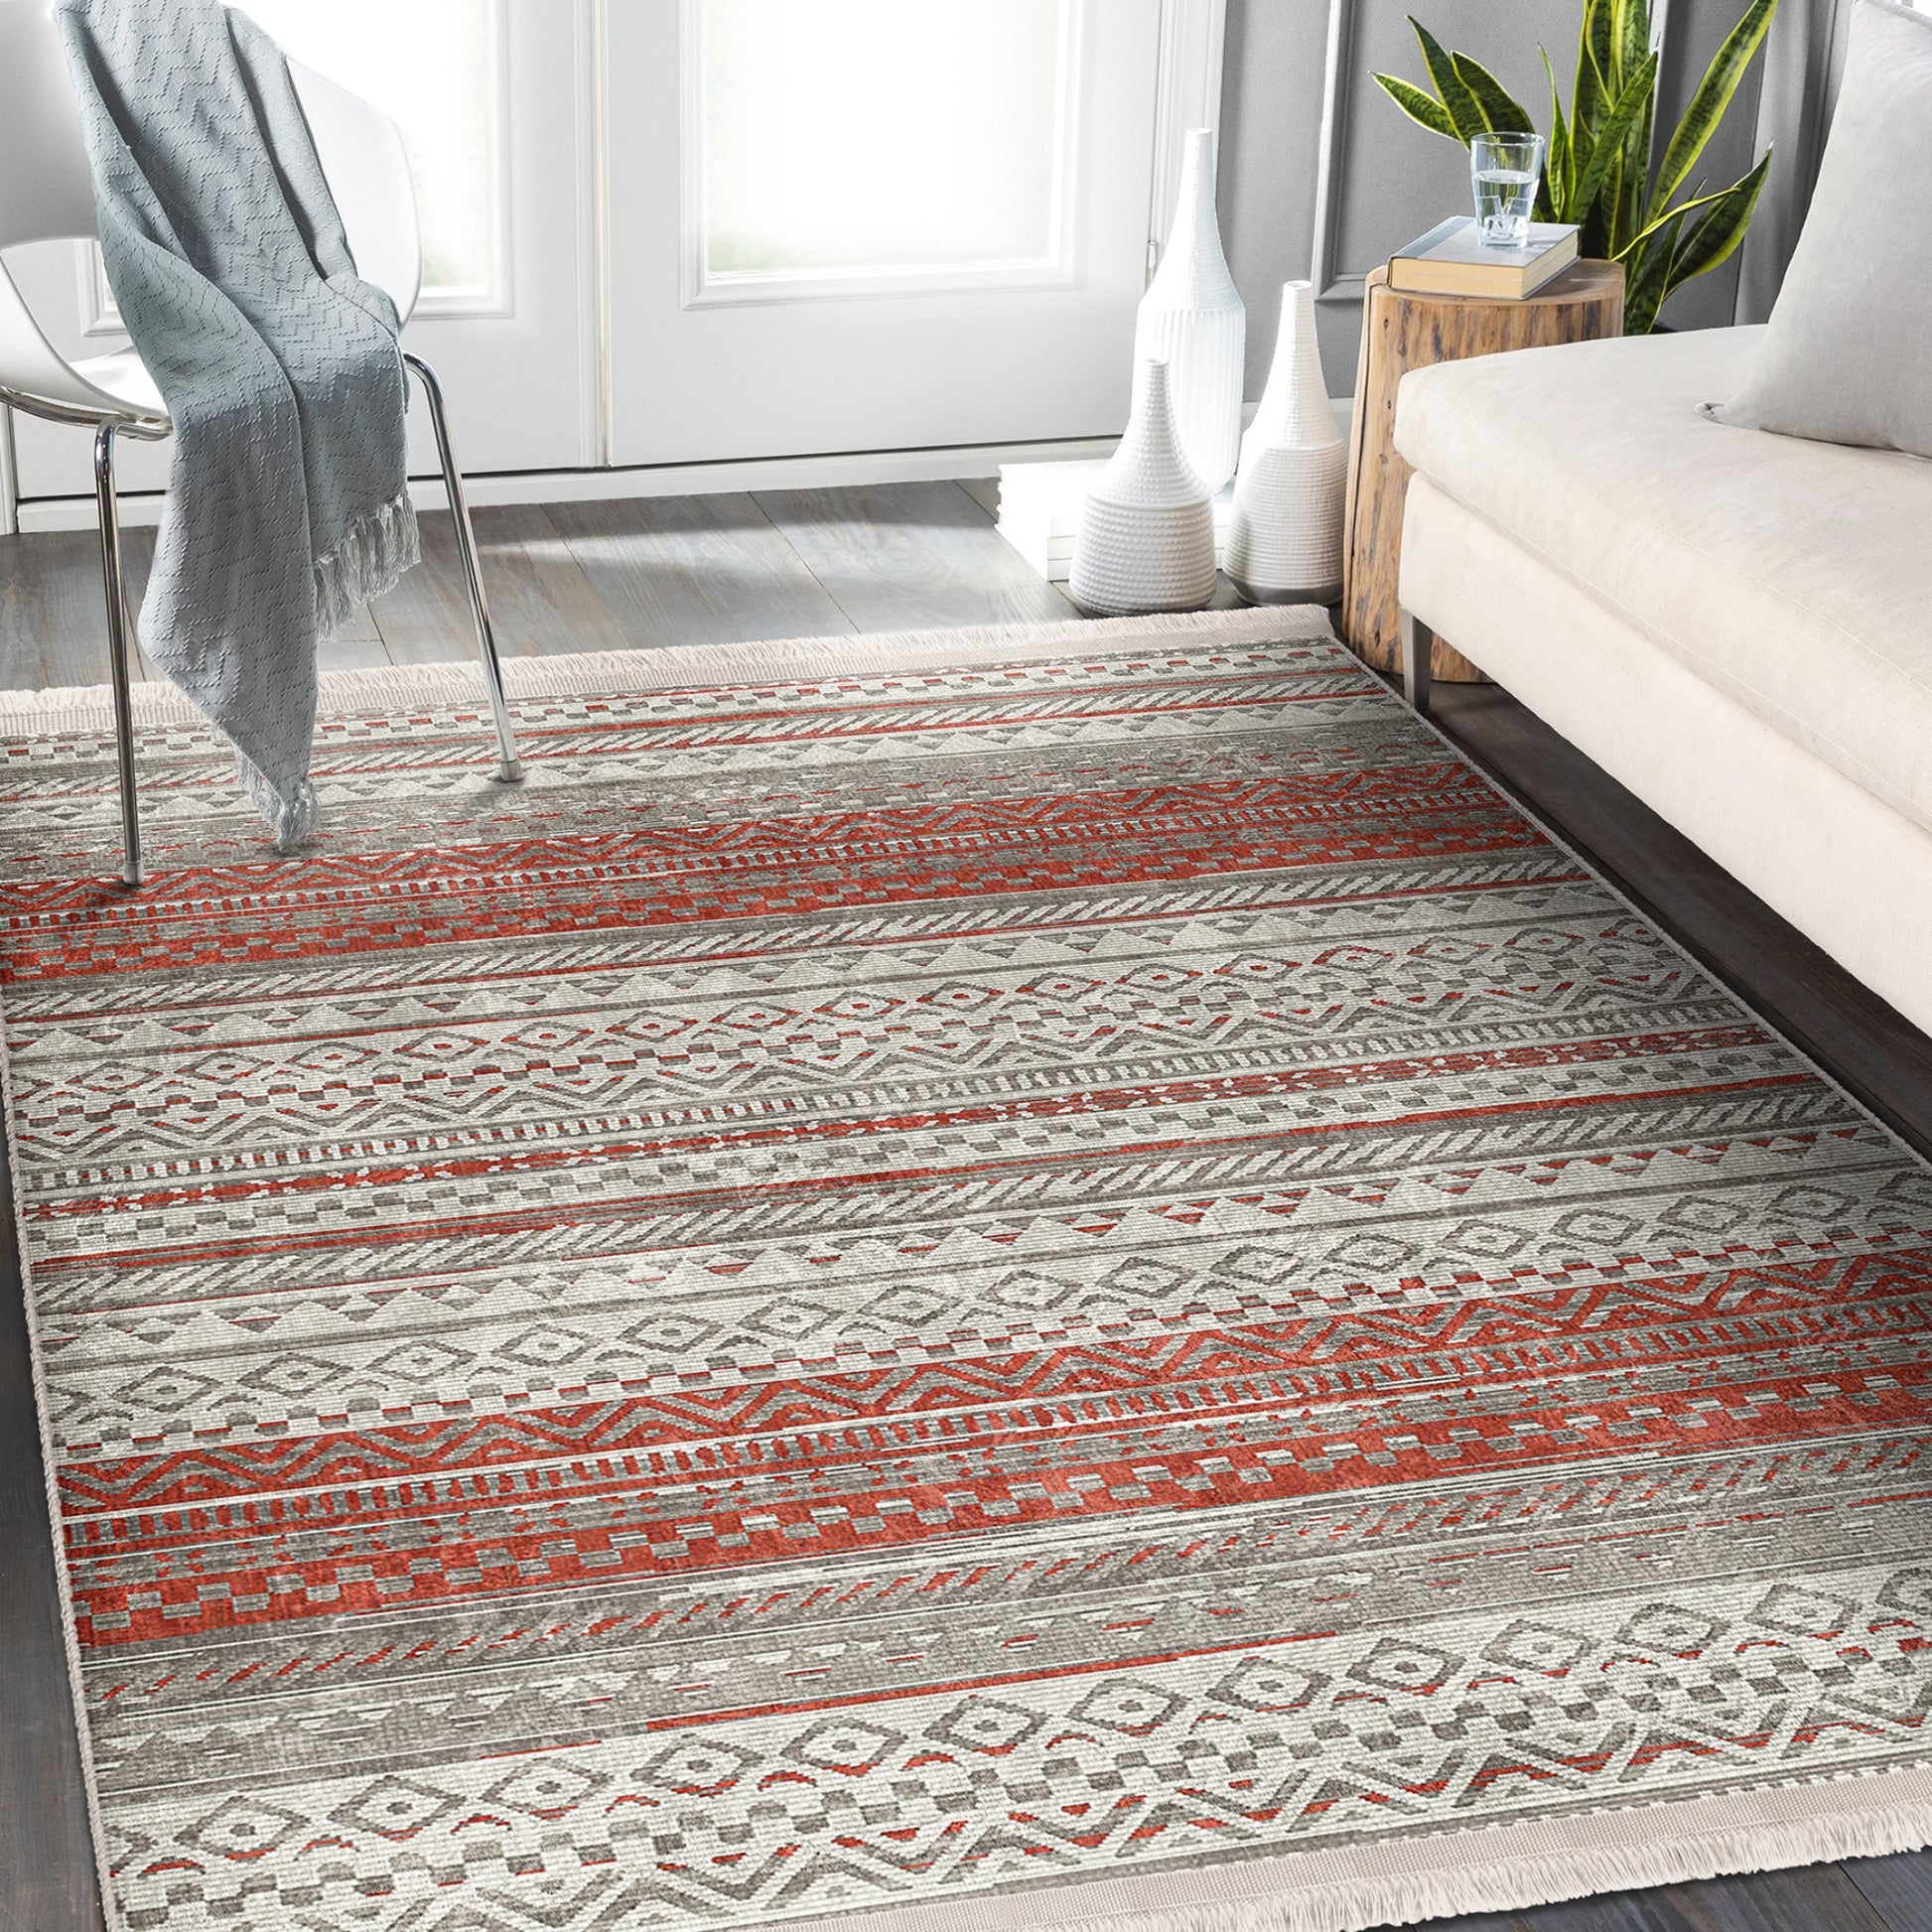 Functional and Stylish Area Rug with Exotic Moroccan Craftsmanship